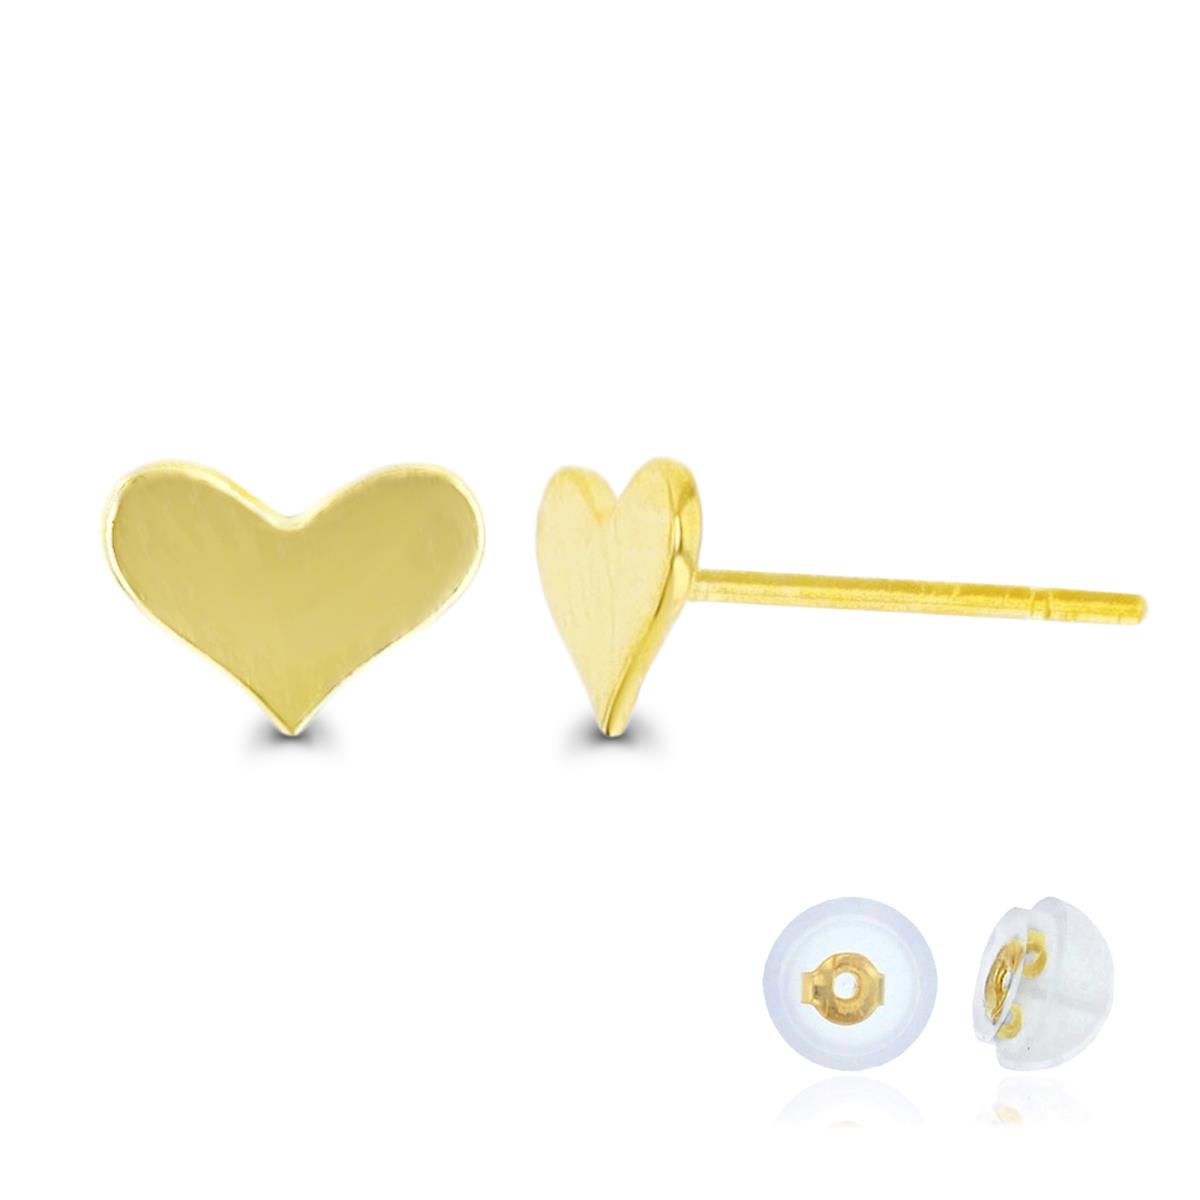 10K Yellow Gold Polished Heart 6.5x4mm Stud Earring Silicone Back